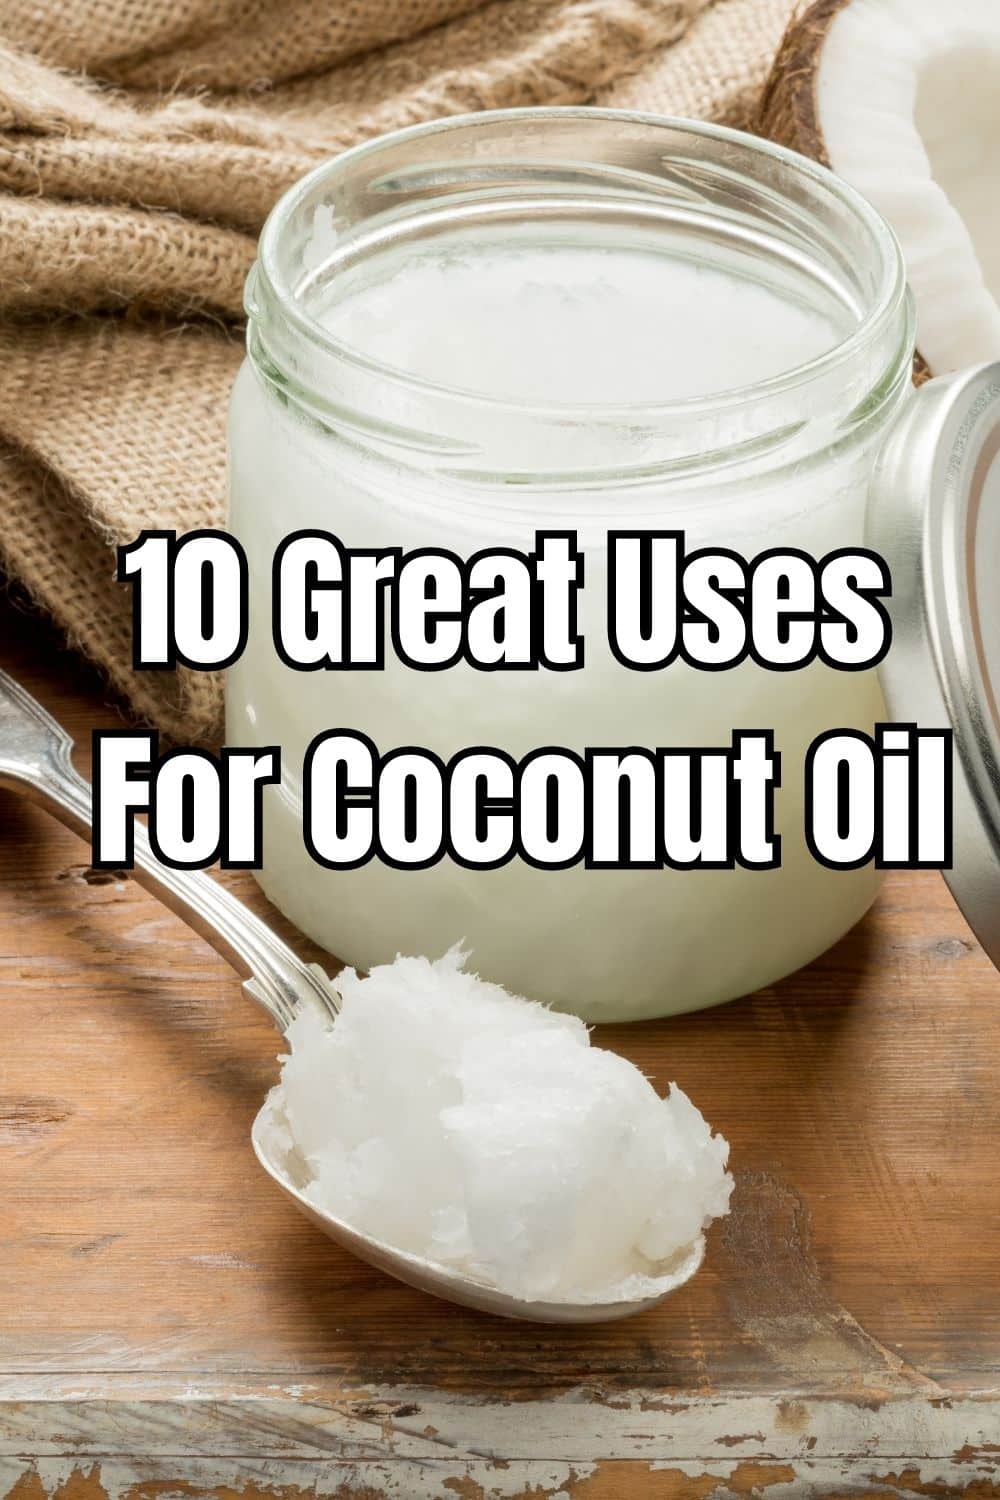 10 Great Uses For Coconut Oil